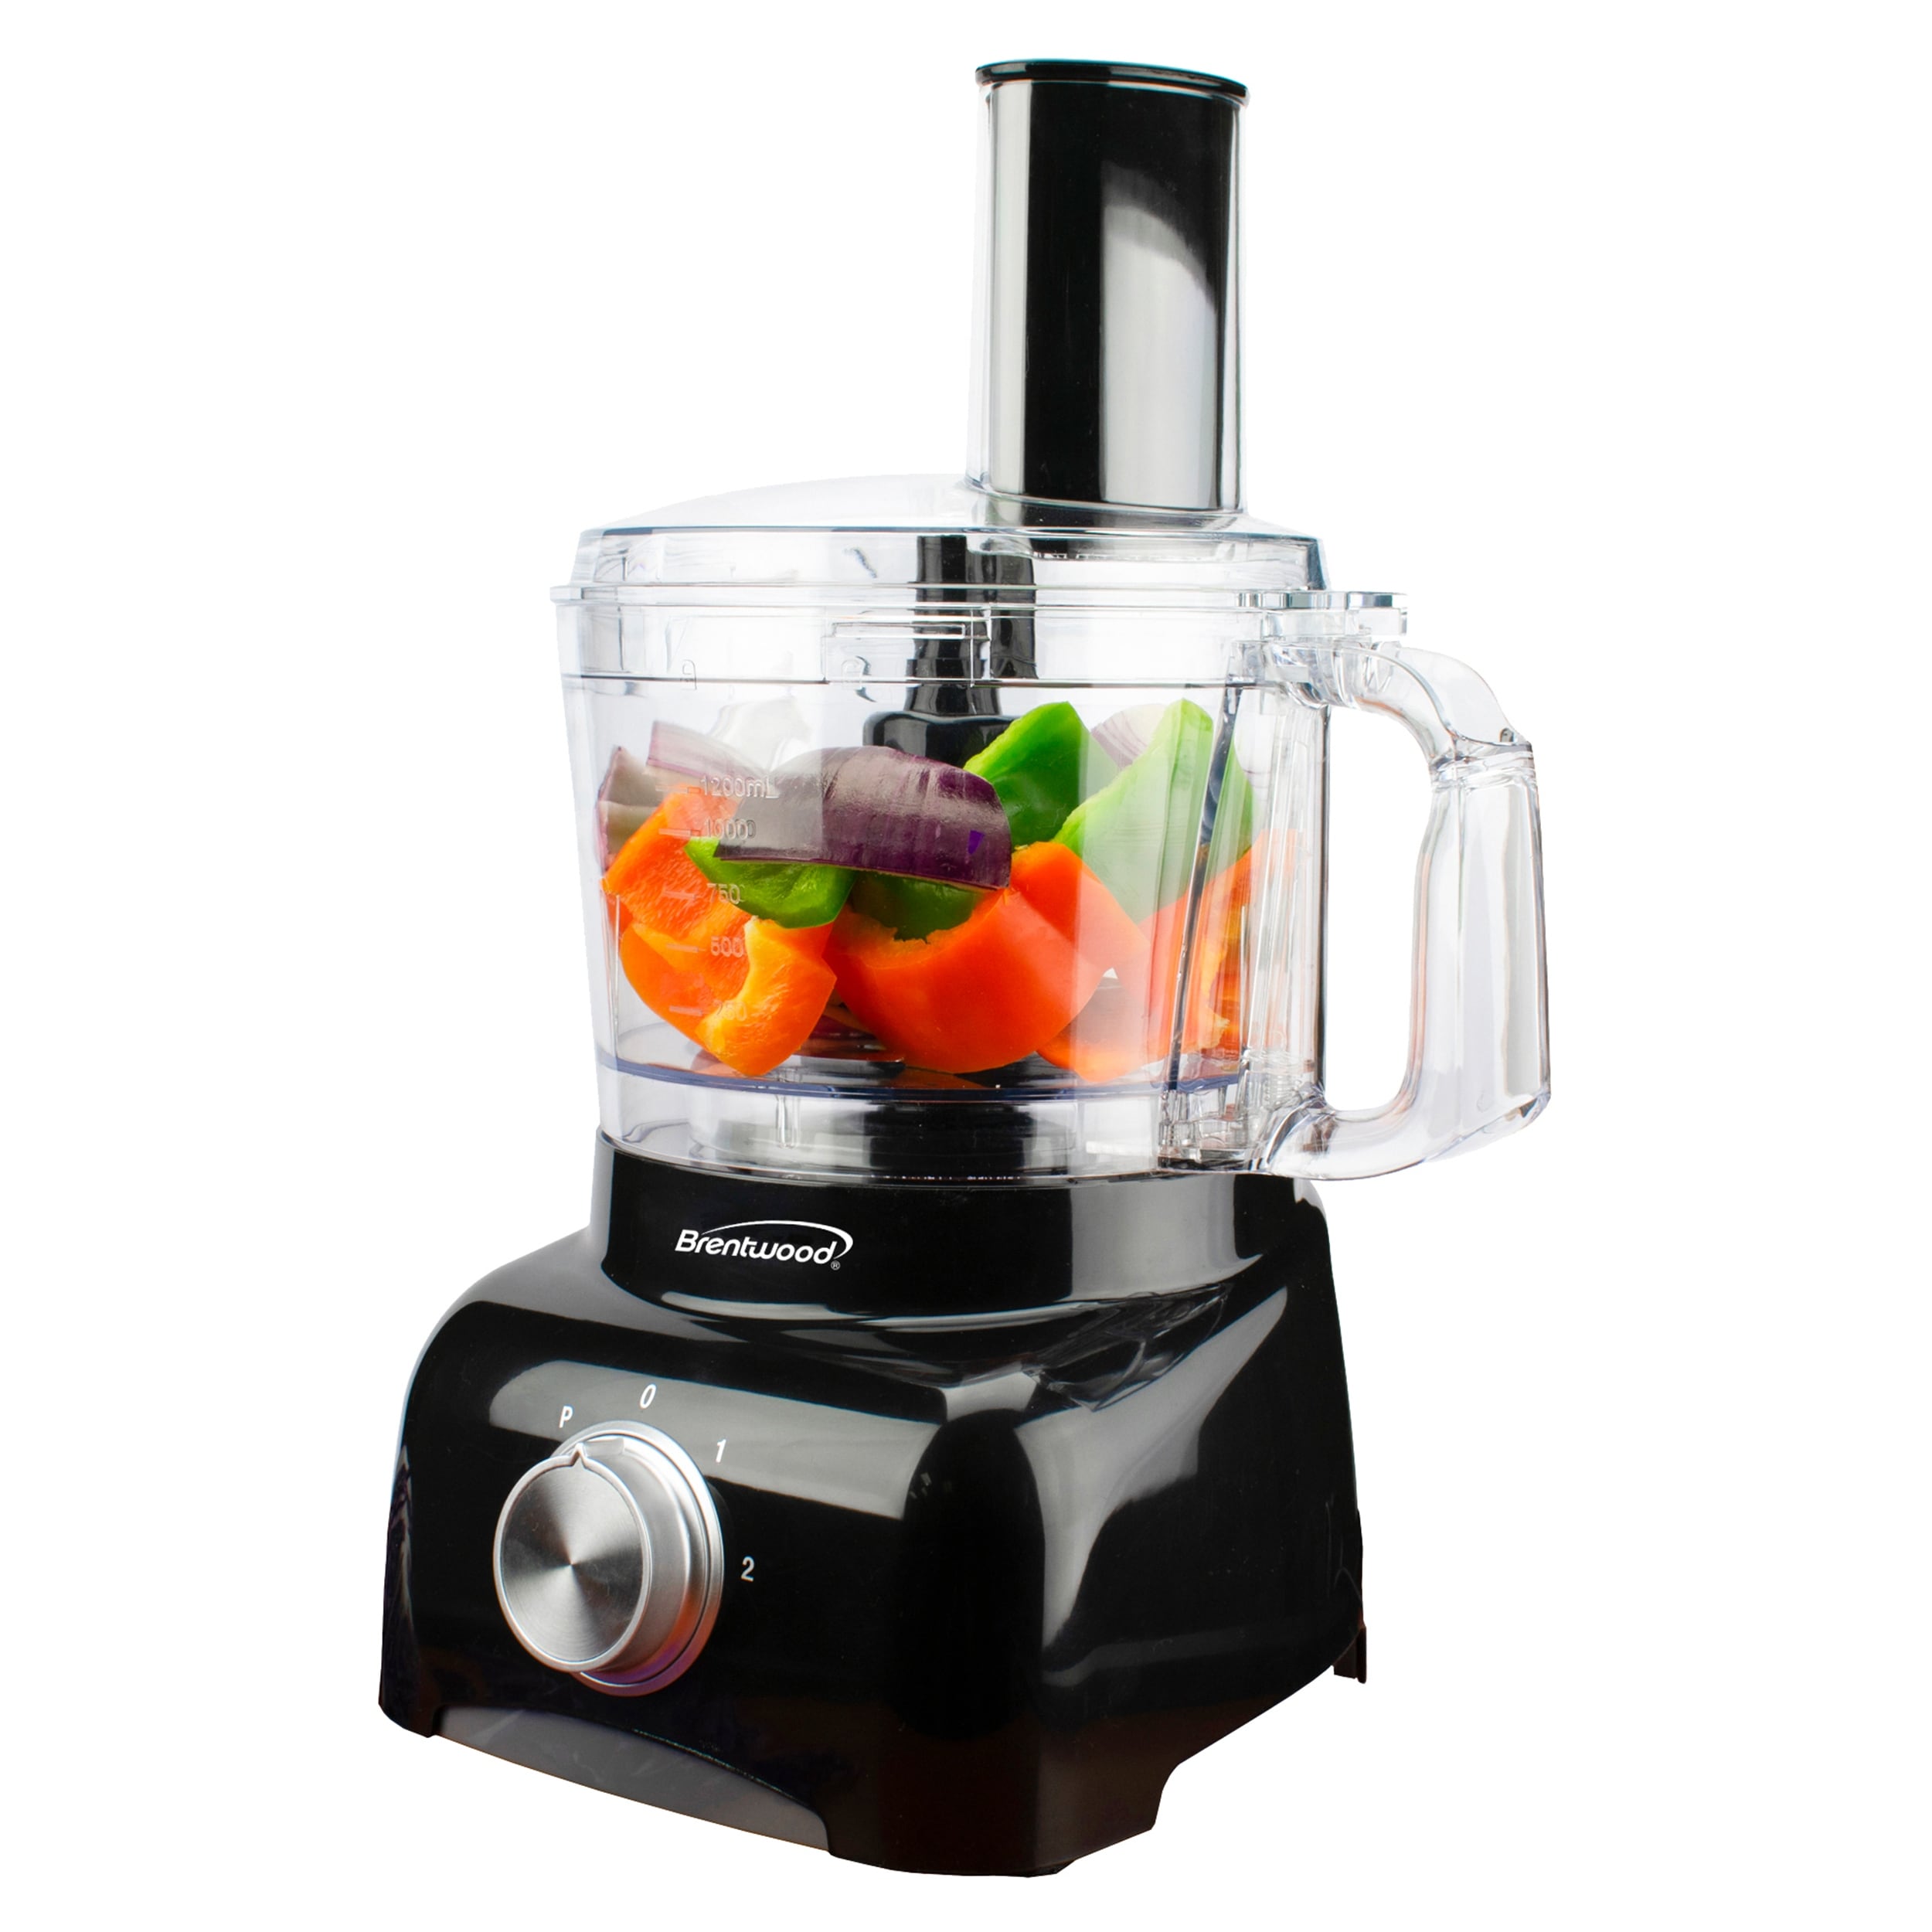 https://ak1.ostkcdn.com/images/products/is/images/direct/d1d8ed983eca6db4fe2709e6f63ebe4e1be950c8/Brentwood-5-Cup-Food-Processor-in-Black.jpg